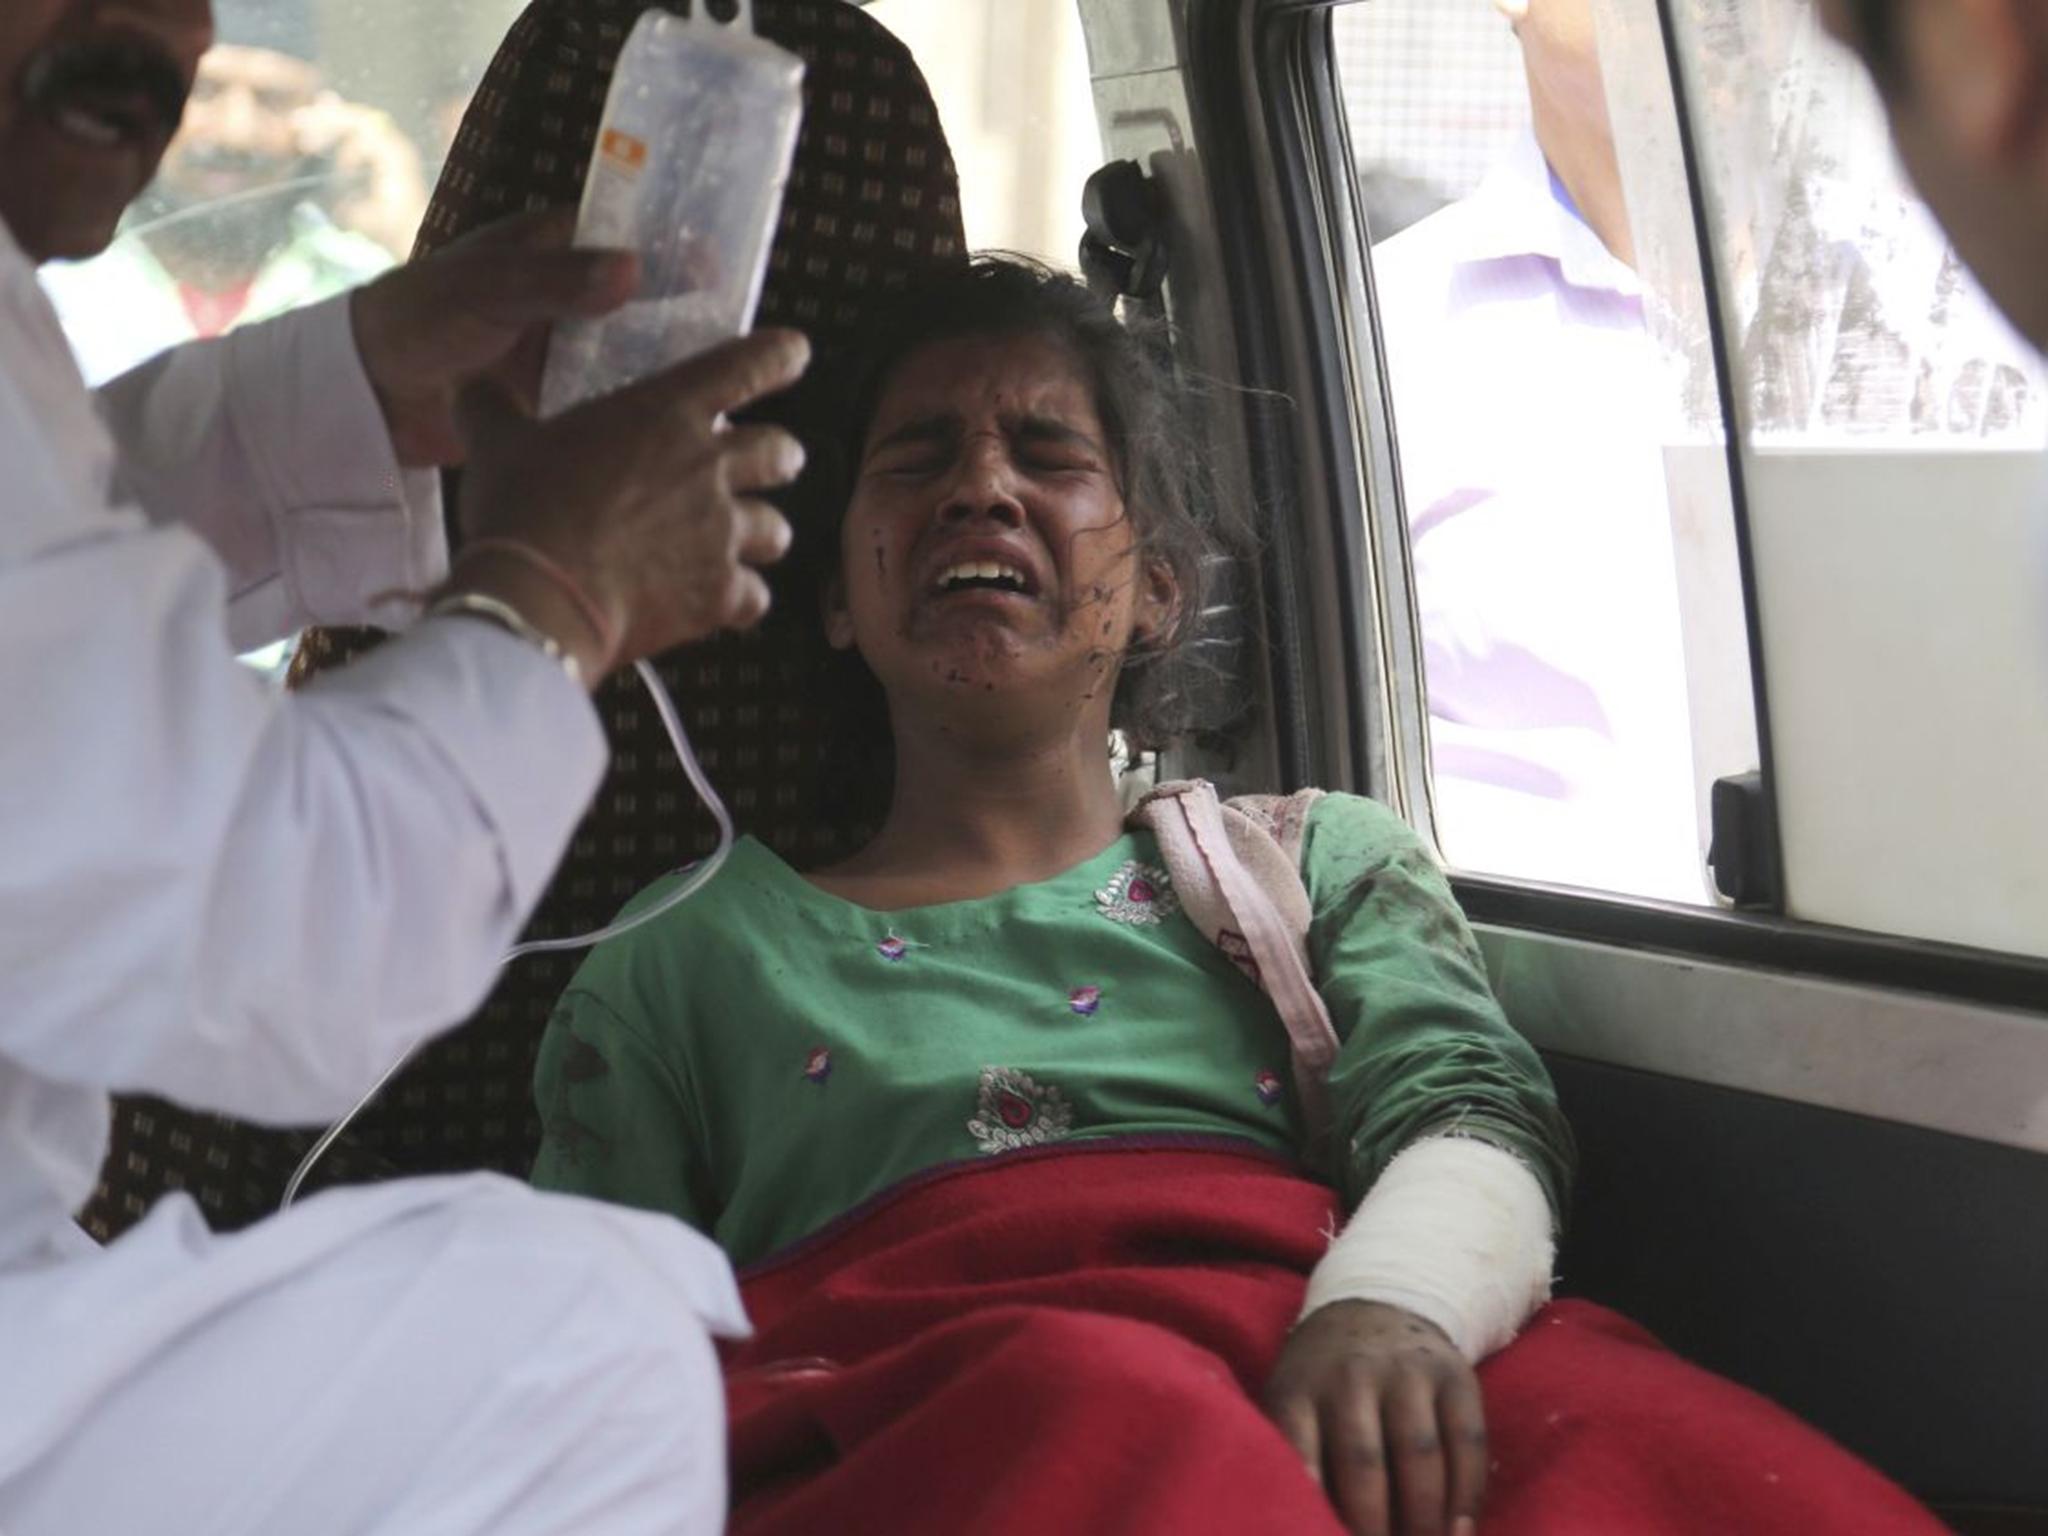 Fourteen-year-old Nooren Akhtar was wounded amid the fighting